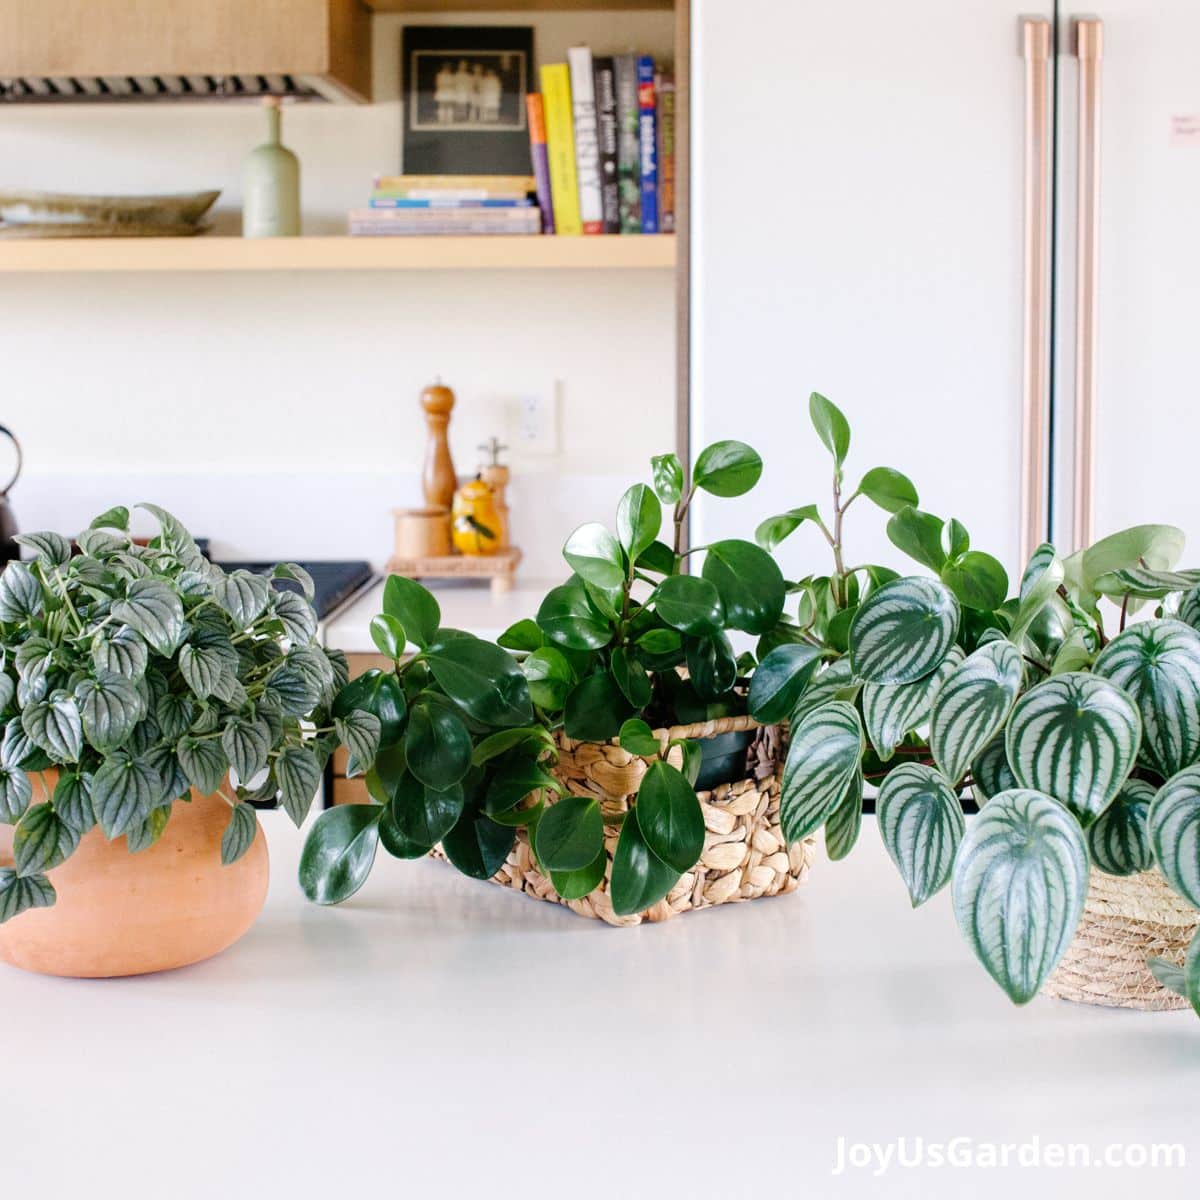 3 peperomias shown on kitchen counter; ripple peperomia, baby rubber plant, and watermelon peperomia